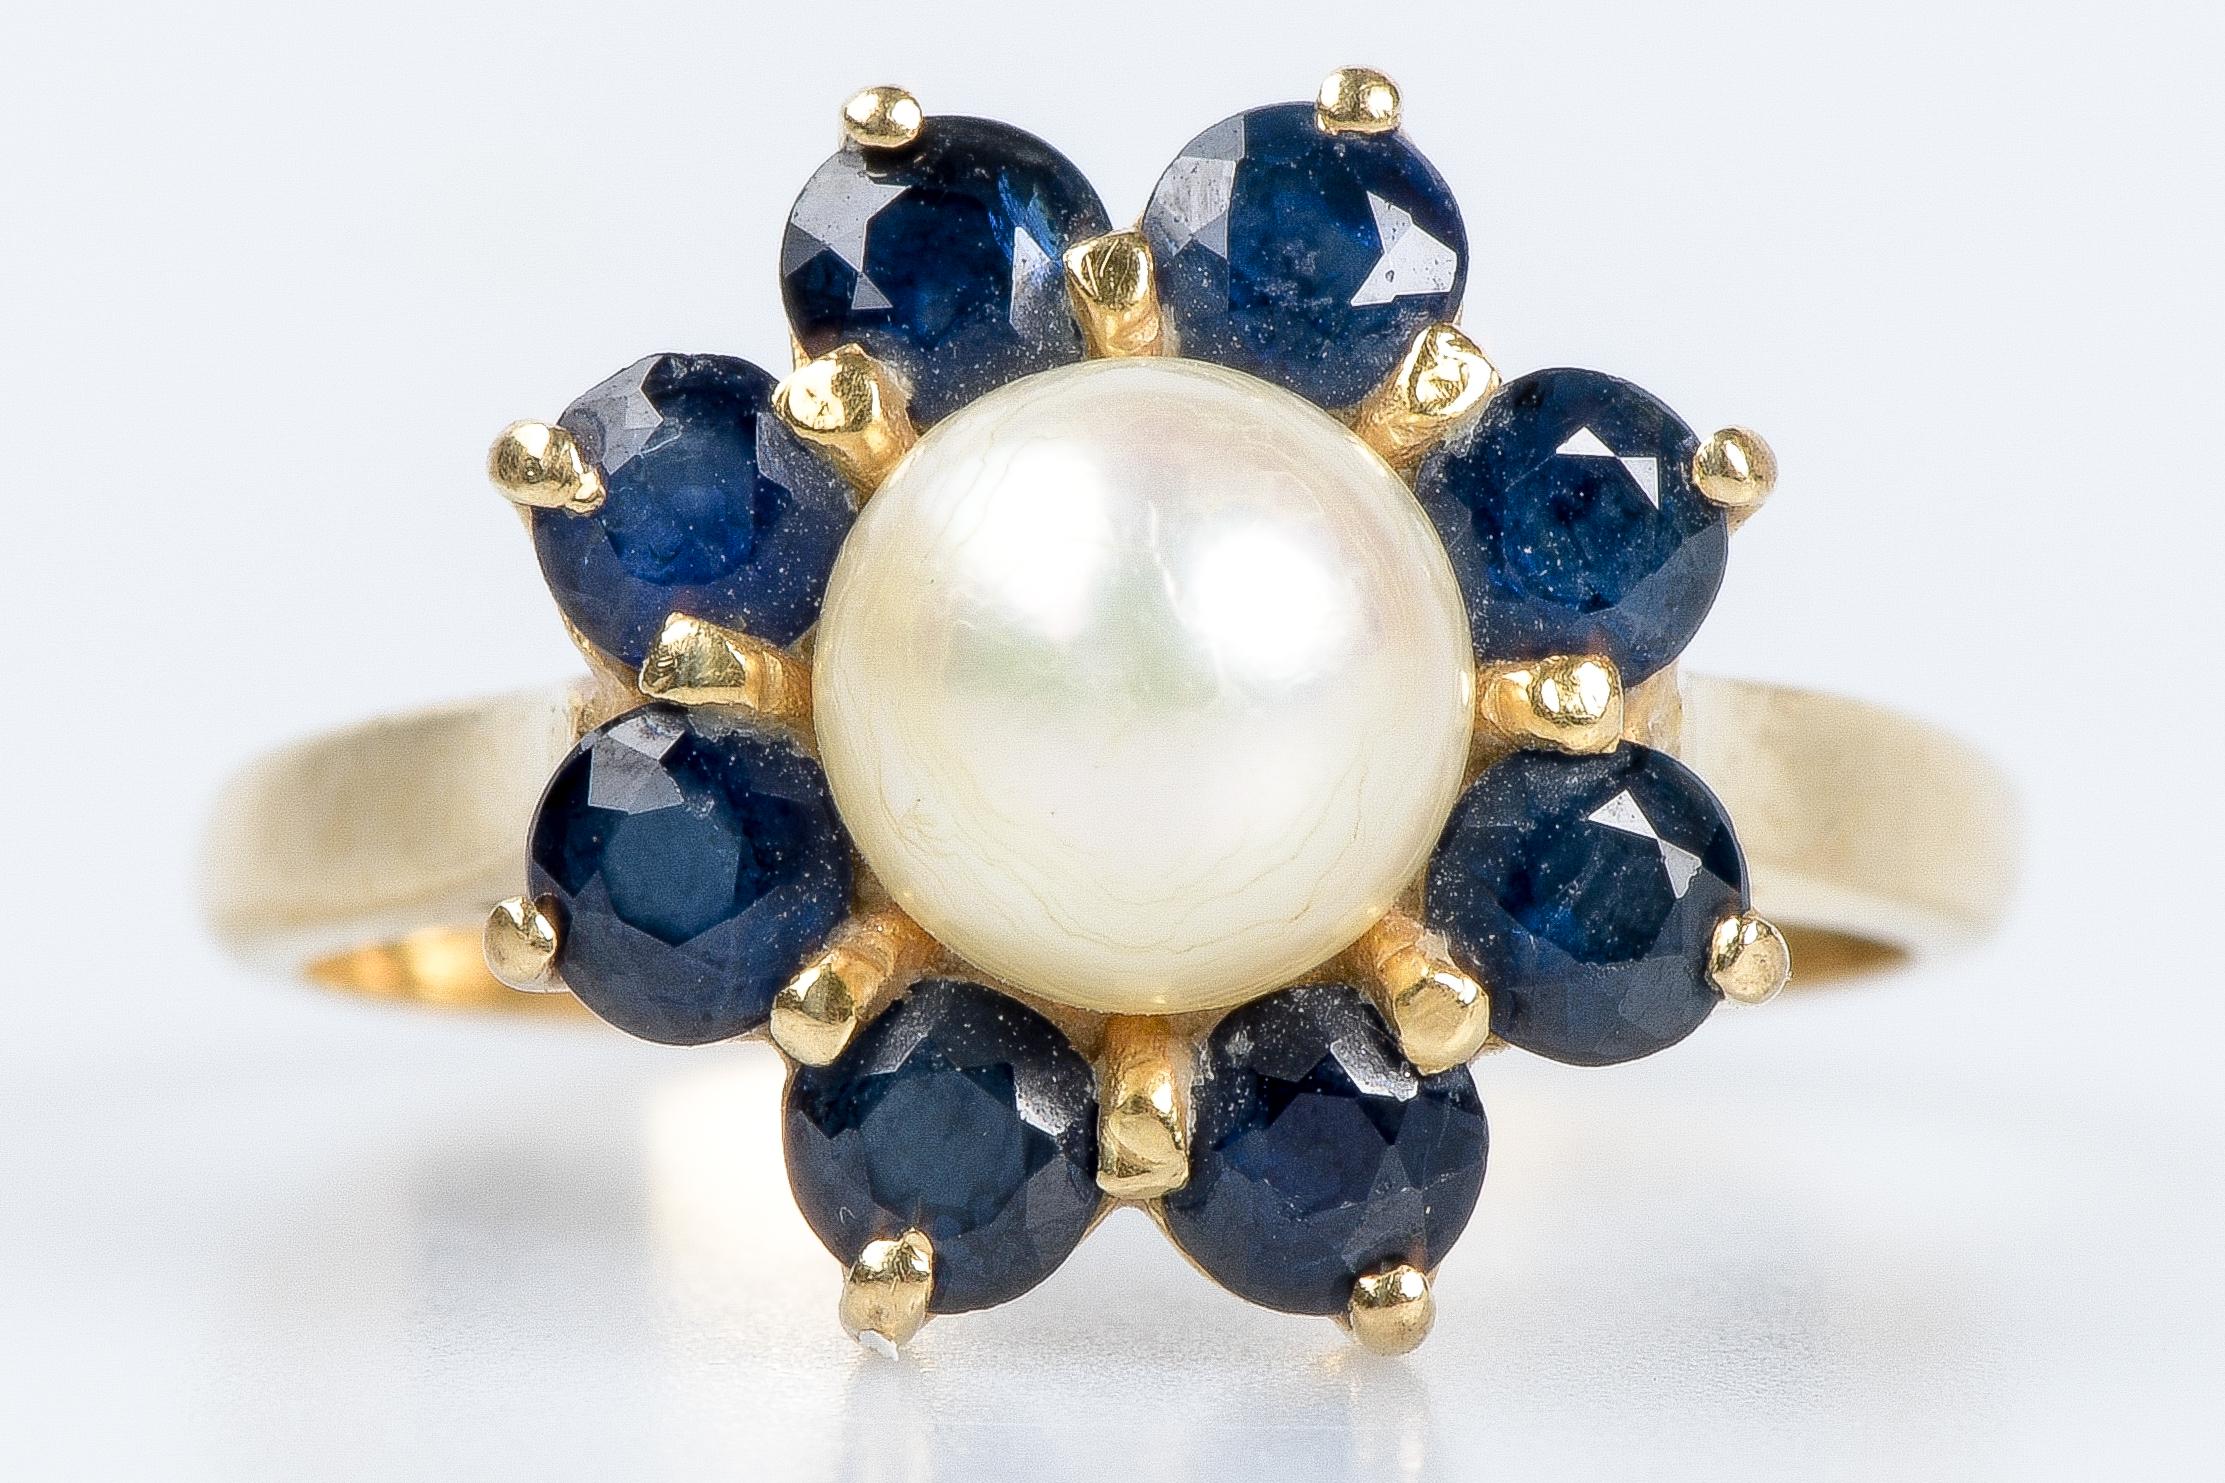 18-carat yellow gold ring with a flower-shaped head adorned with 8 sapphires of 0.13 carats each, or 1.04 carats in total and a 6.4 mm cultured pearl. Ideal for everyday wear to add a touch of sophistication to an outfit. 

Weight: 4 gr. 

Size: EU